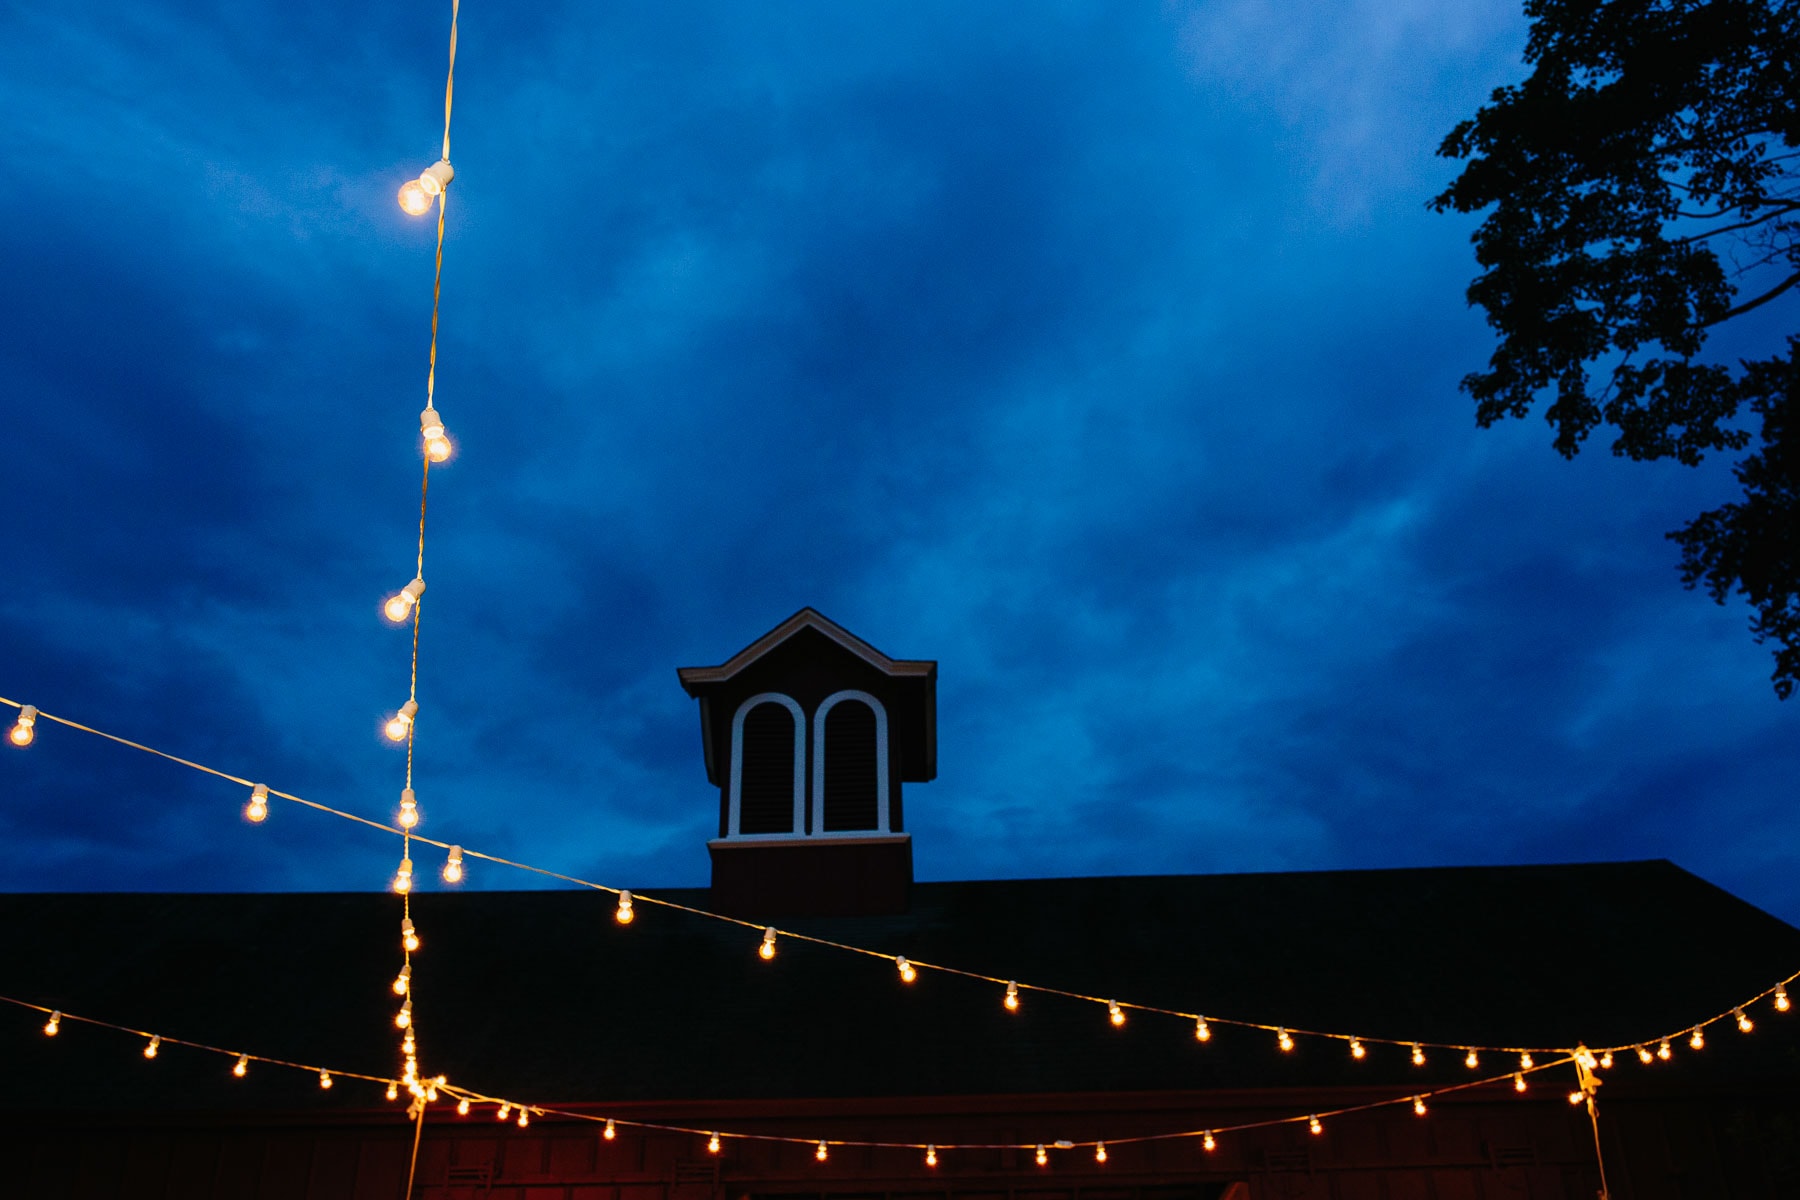 bistro lights and barn at blue hour